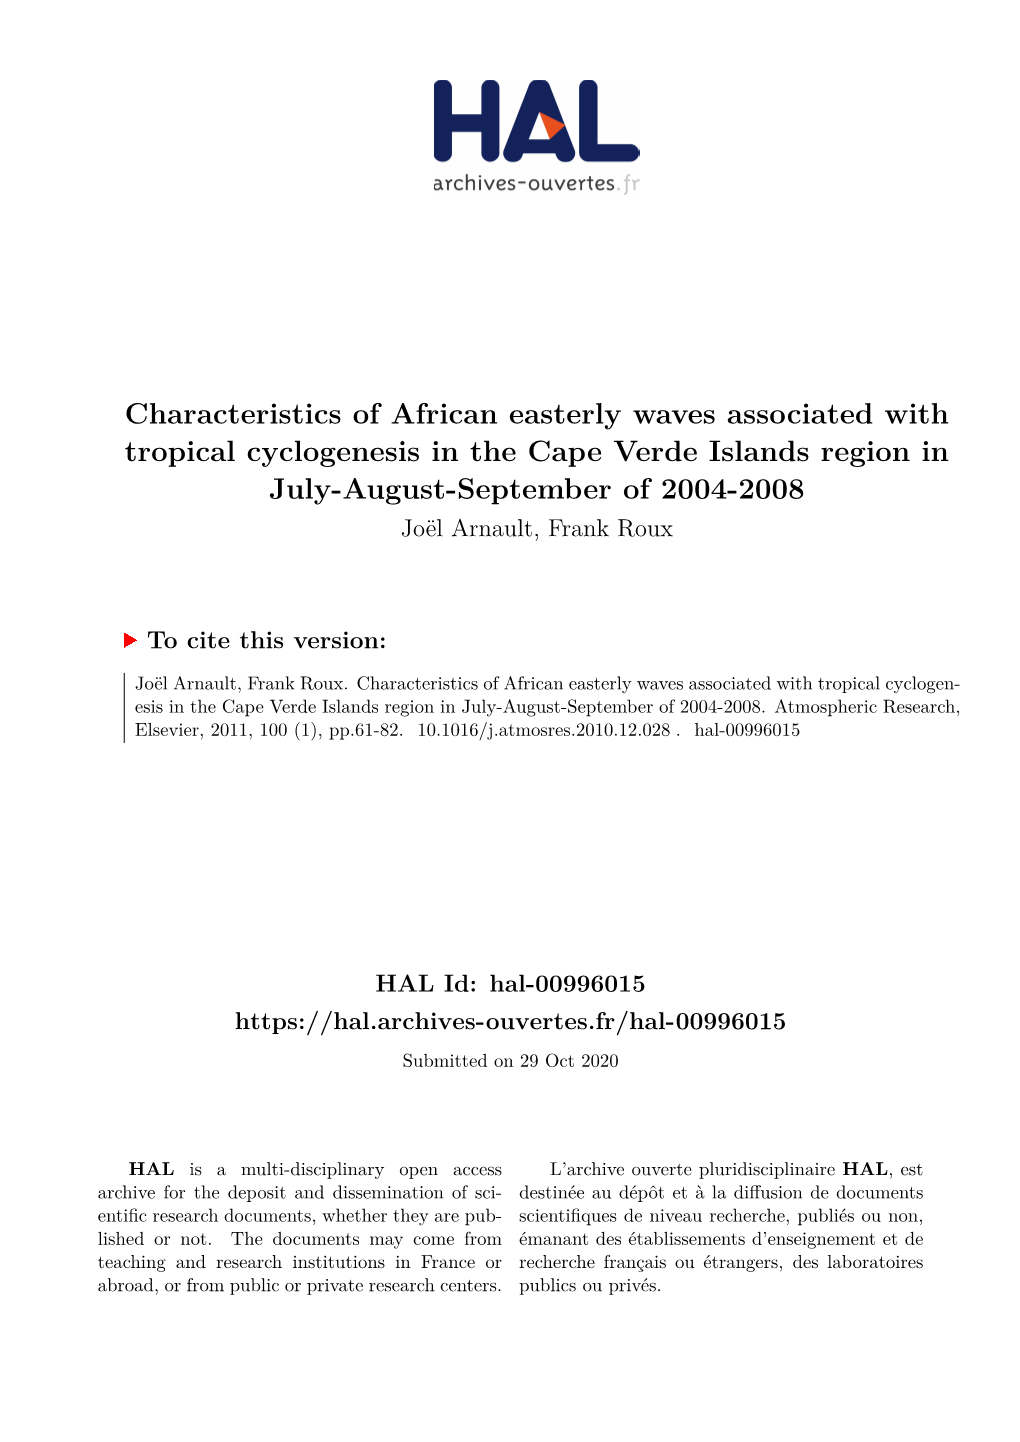 Characteristics of African Easterly Waves